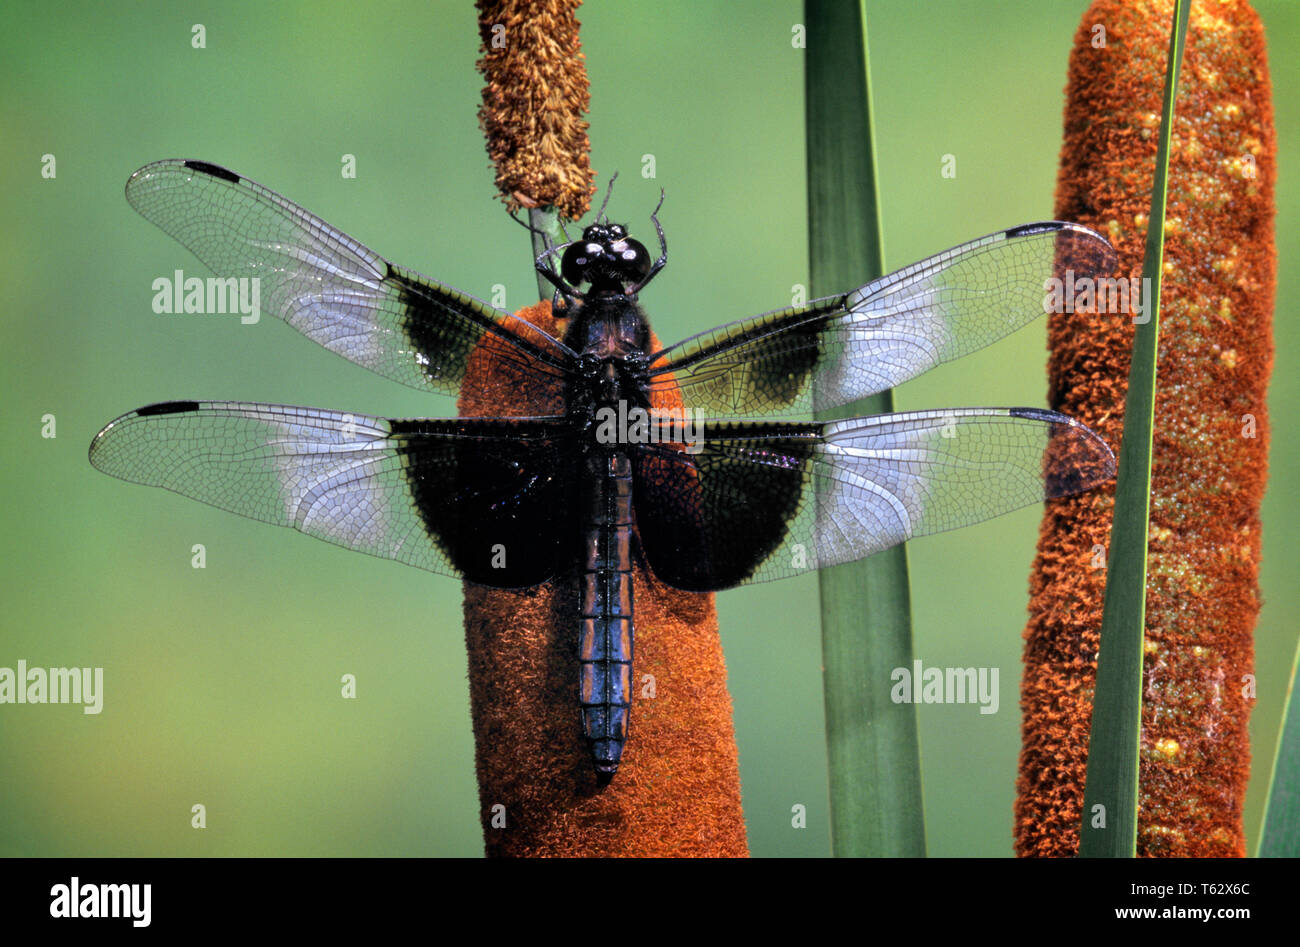 2000s SINGLE DRAGONFLY Odonata Anisoptera PERCHING ON CATTAIL Typha domingensis PLANT  - ki10754 RSS001 HARS REED Stock Photo